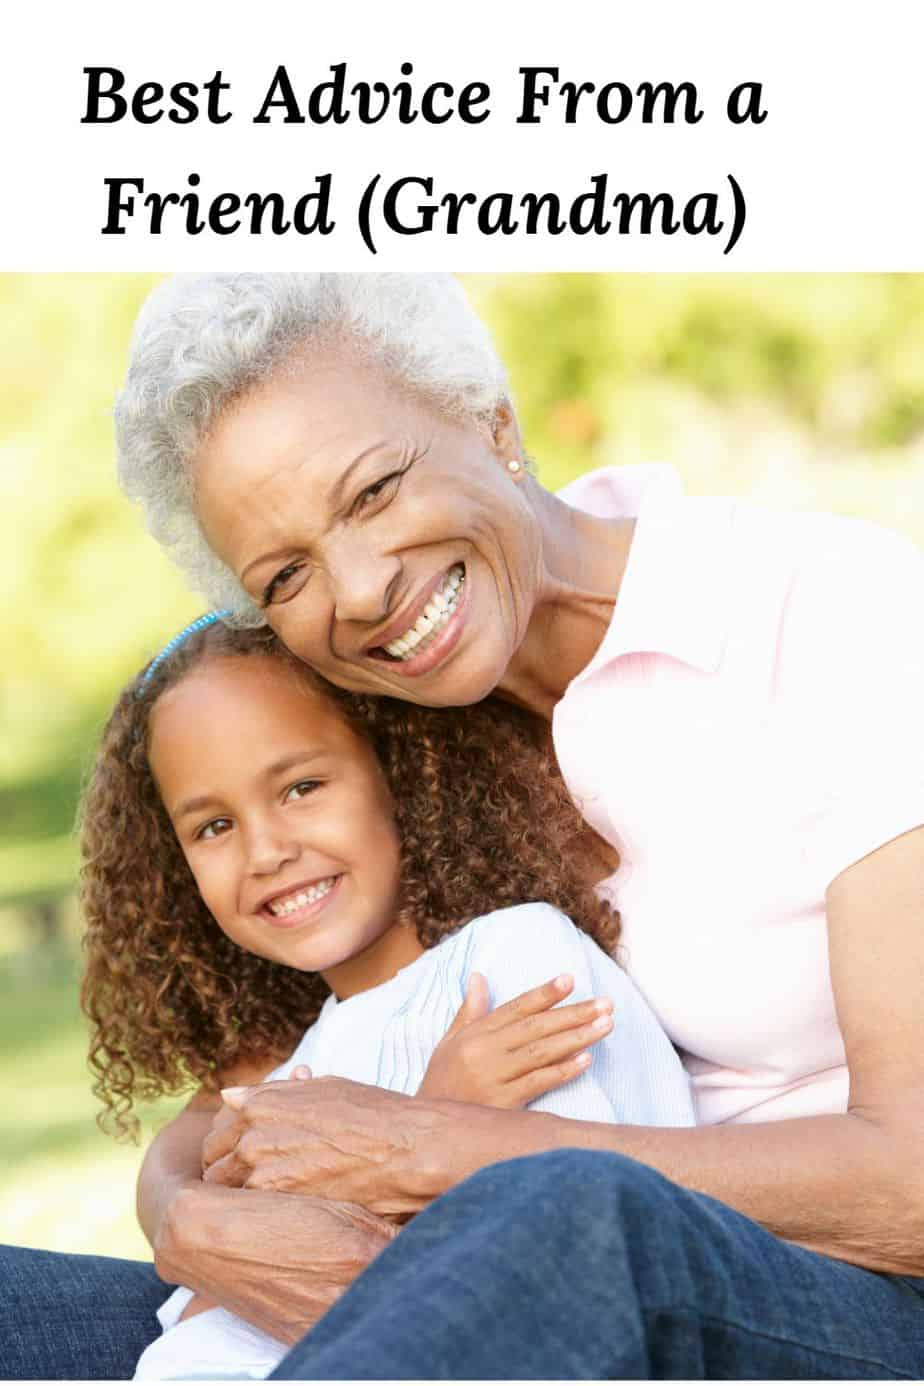 African American grandmother and granddaughter and the words "Best Advice From a Friend Grandma"